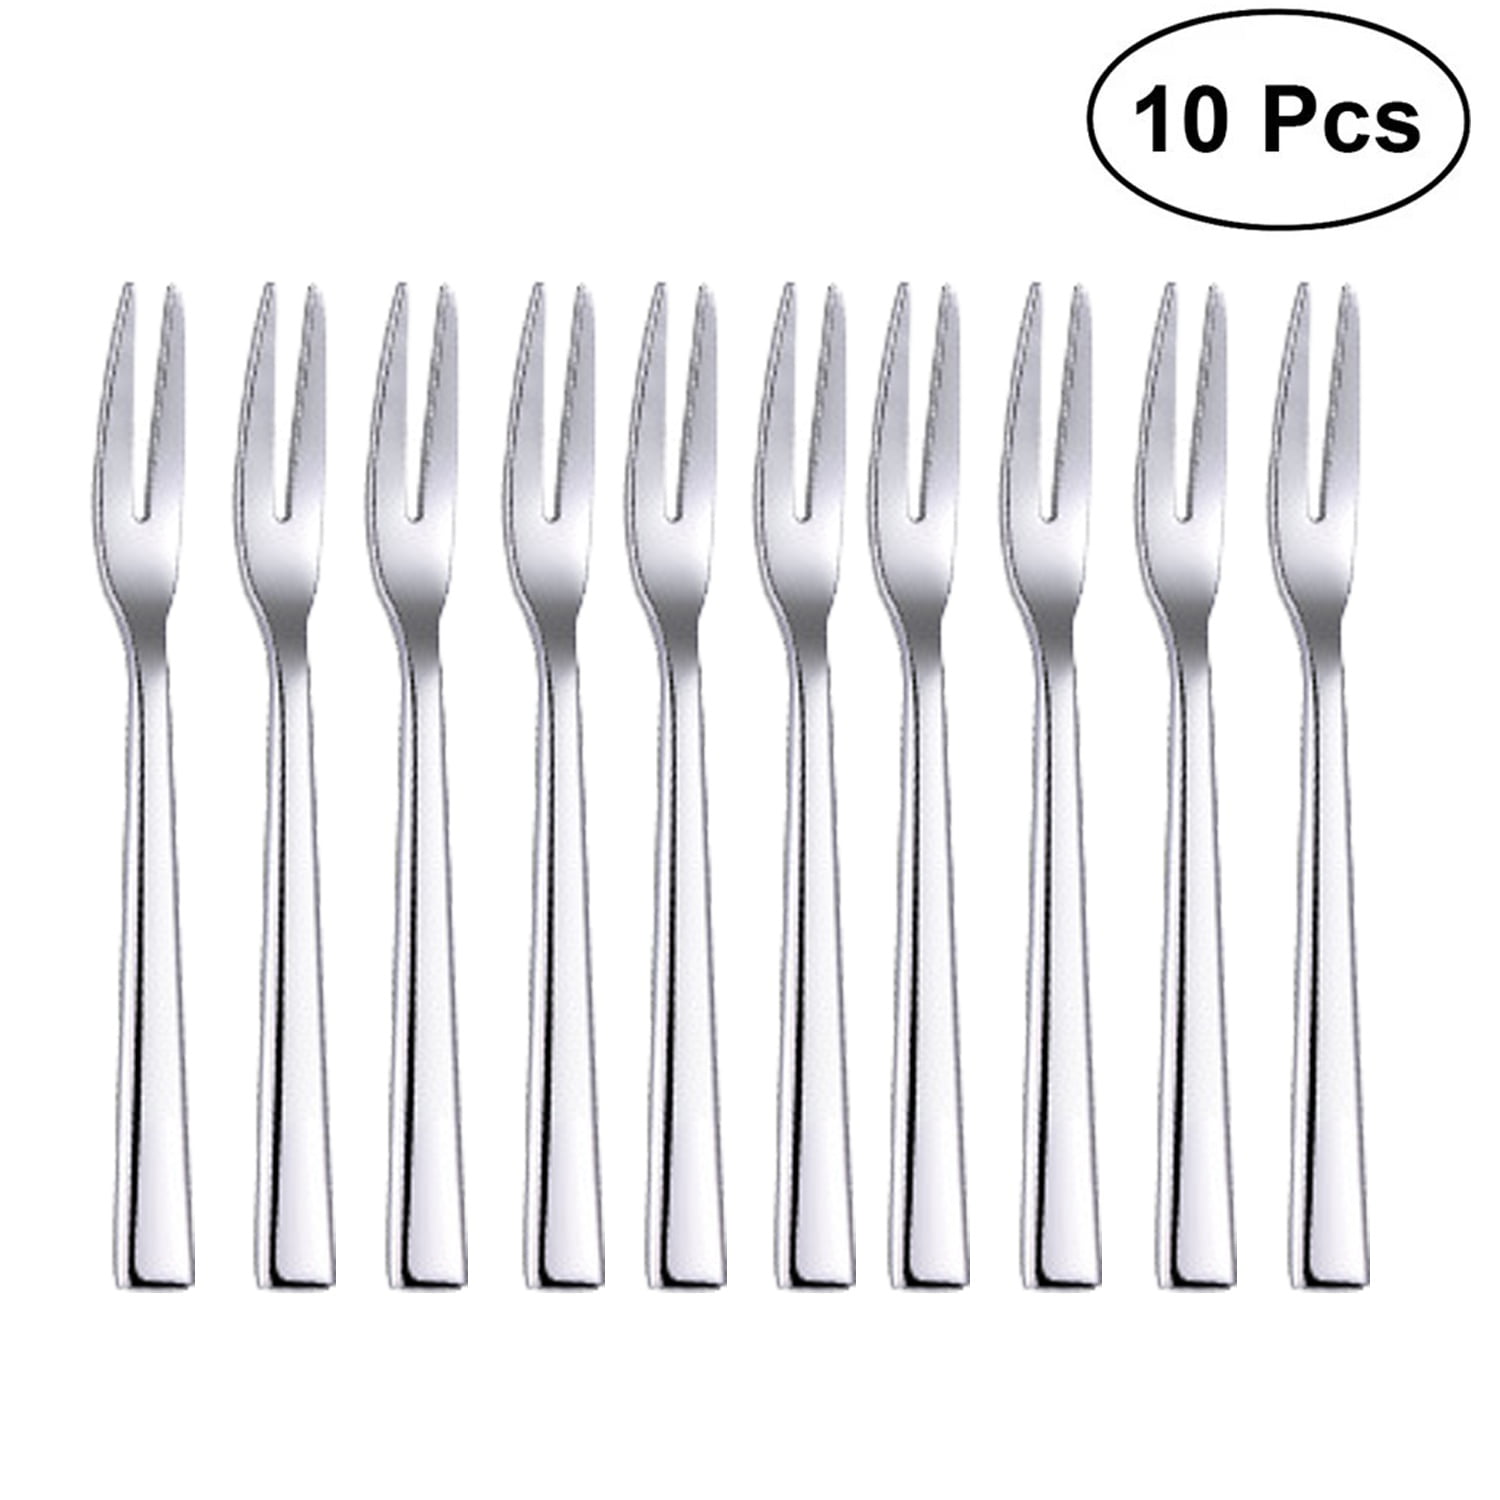 304 Stainless Steel Forks Set Dessert and Cake Dessert Fork Two Tooth Forks Home Party Stainless Steel Fruit Forks for Fruit Dessert Forks 